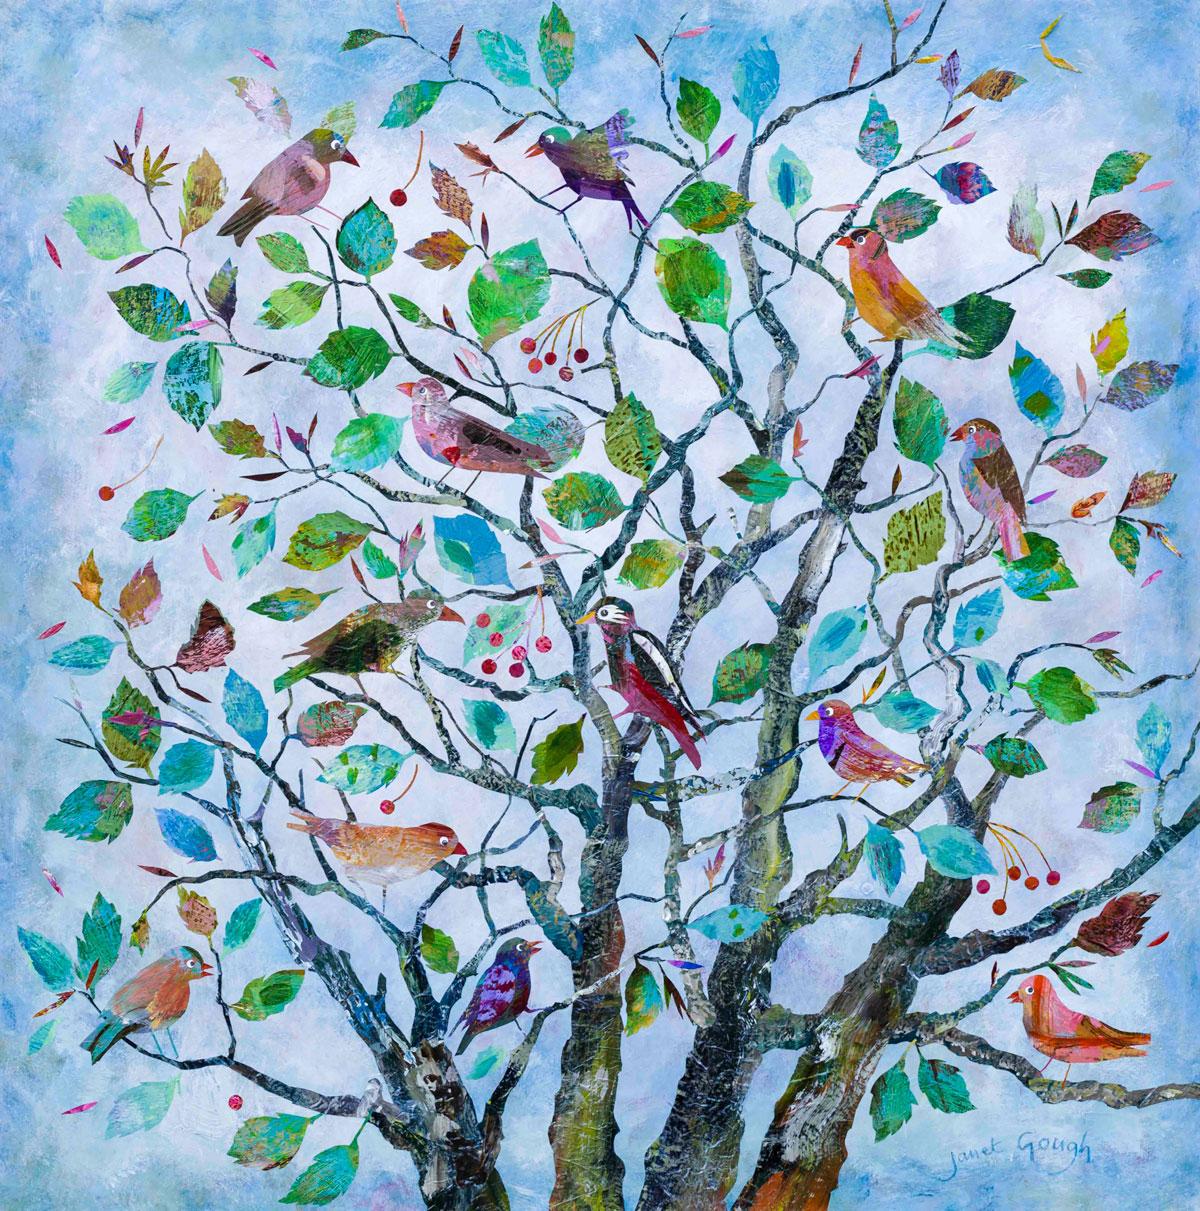 Janet Gough Animal Painting - Family Tree - contemporary colorful mixed media floral bird painting on board